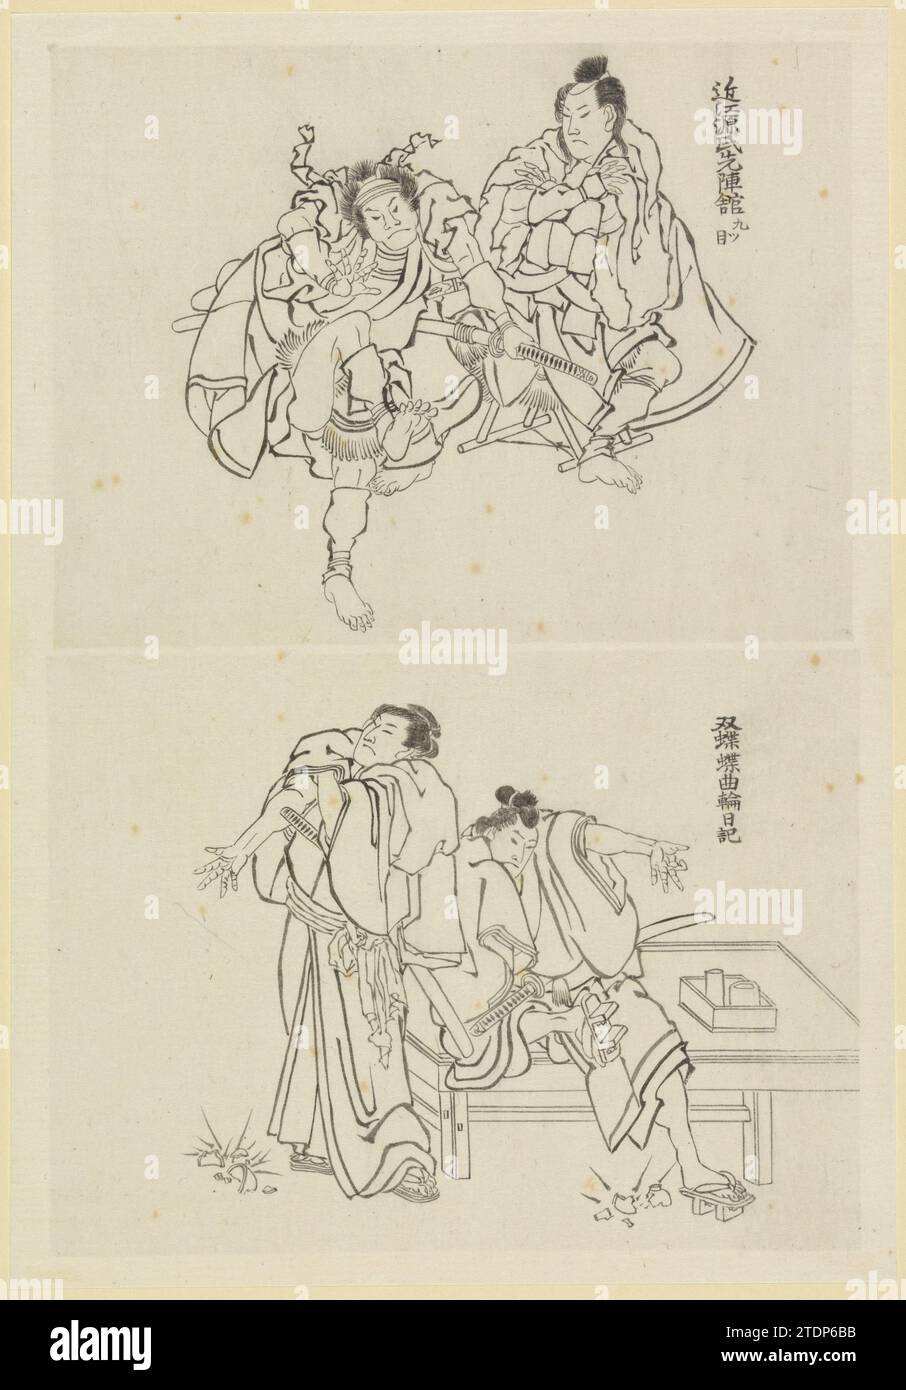 Two theater scenes, one with two samurai and one with two figures at a table, Katsushika Hokusai, 1800 - 1900 Leaf with two stuck drawings with theater scenes: one with two samurai and one with two figures at a low table. An inscription gives the names of the documents. Japan paper brush Leaf with two stuck drawings with theater scenes: one with two samurai and one with two figures at a low table. An inscription gives the names of the documents. Japan paper brush Stock Photo